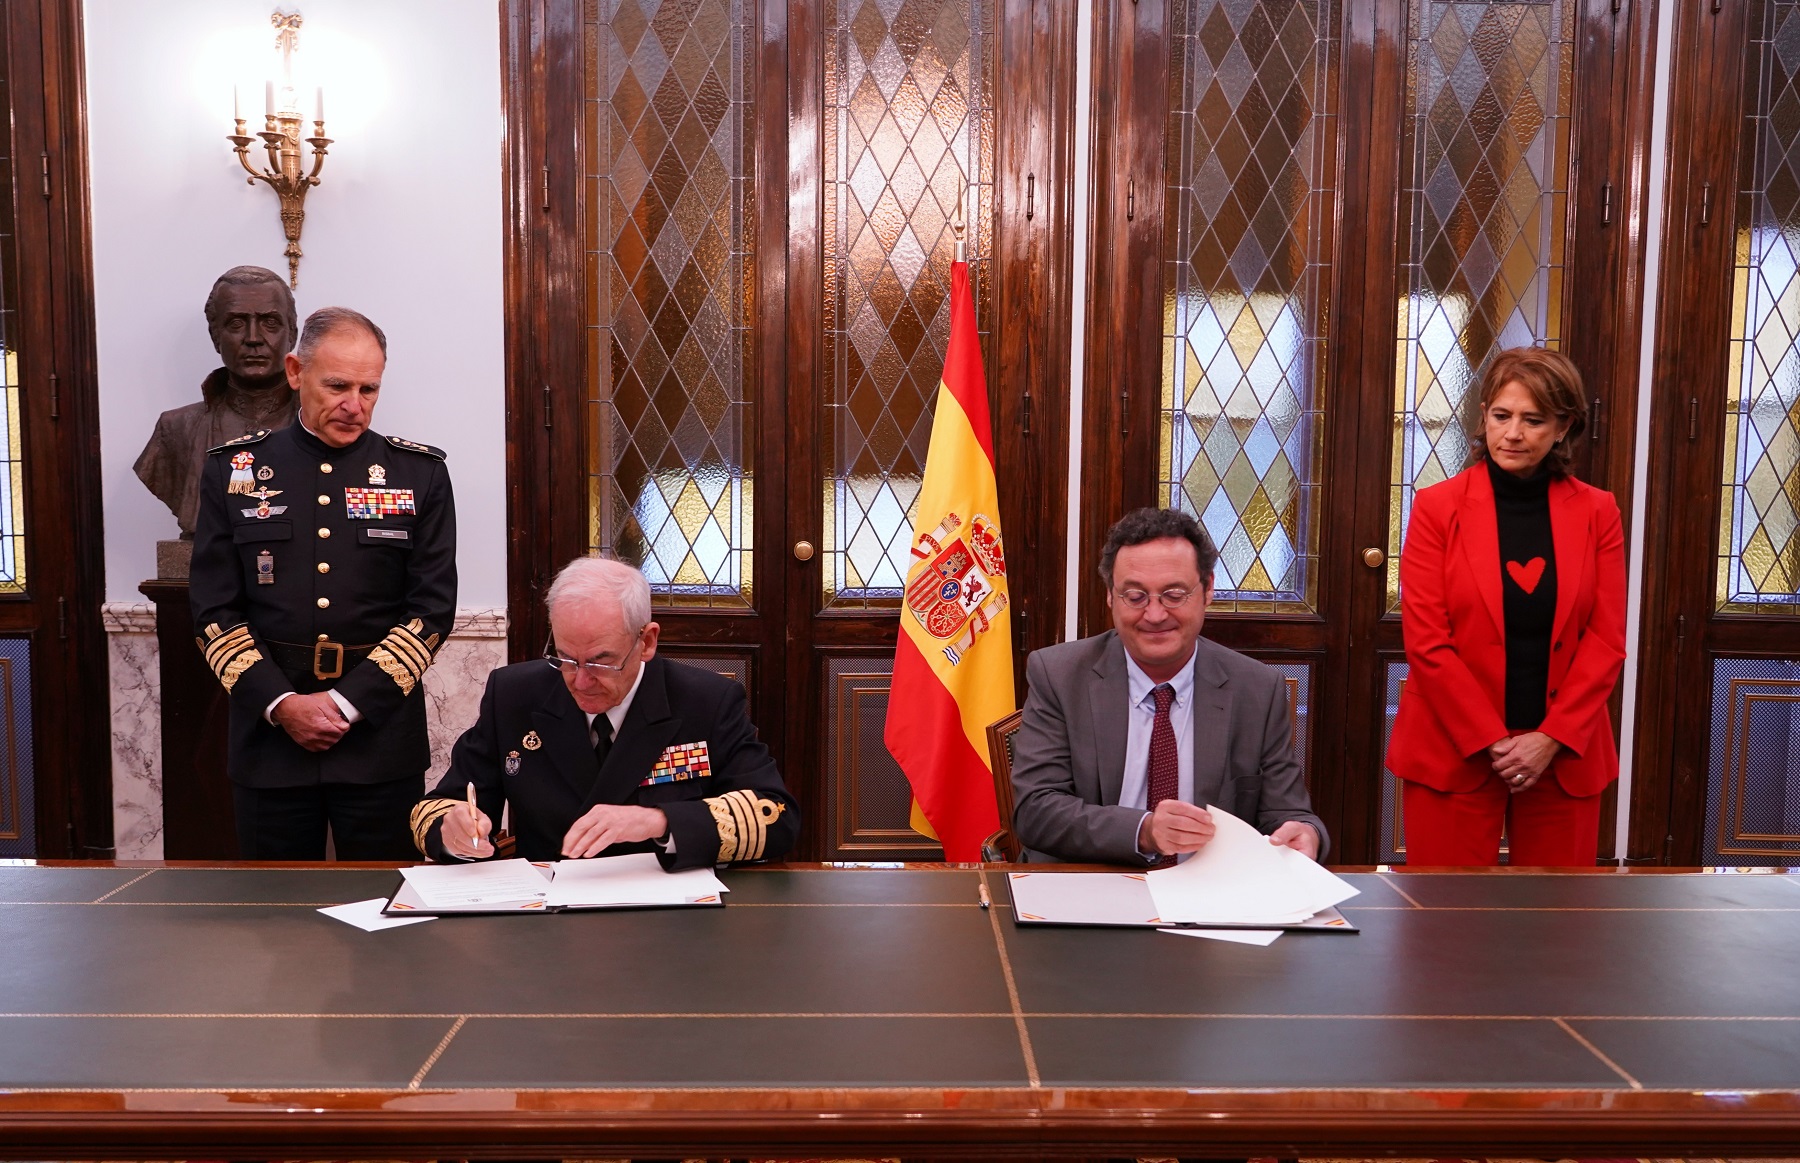 Signing of the agreement with the Public Prosecutor's Office